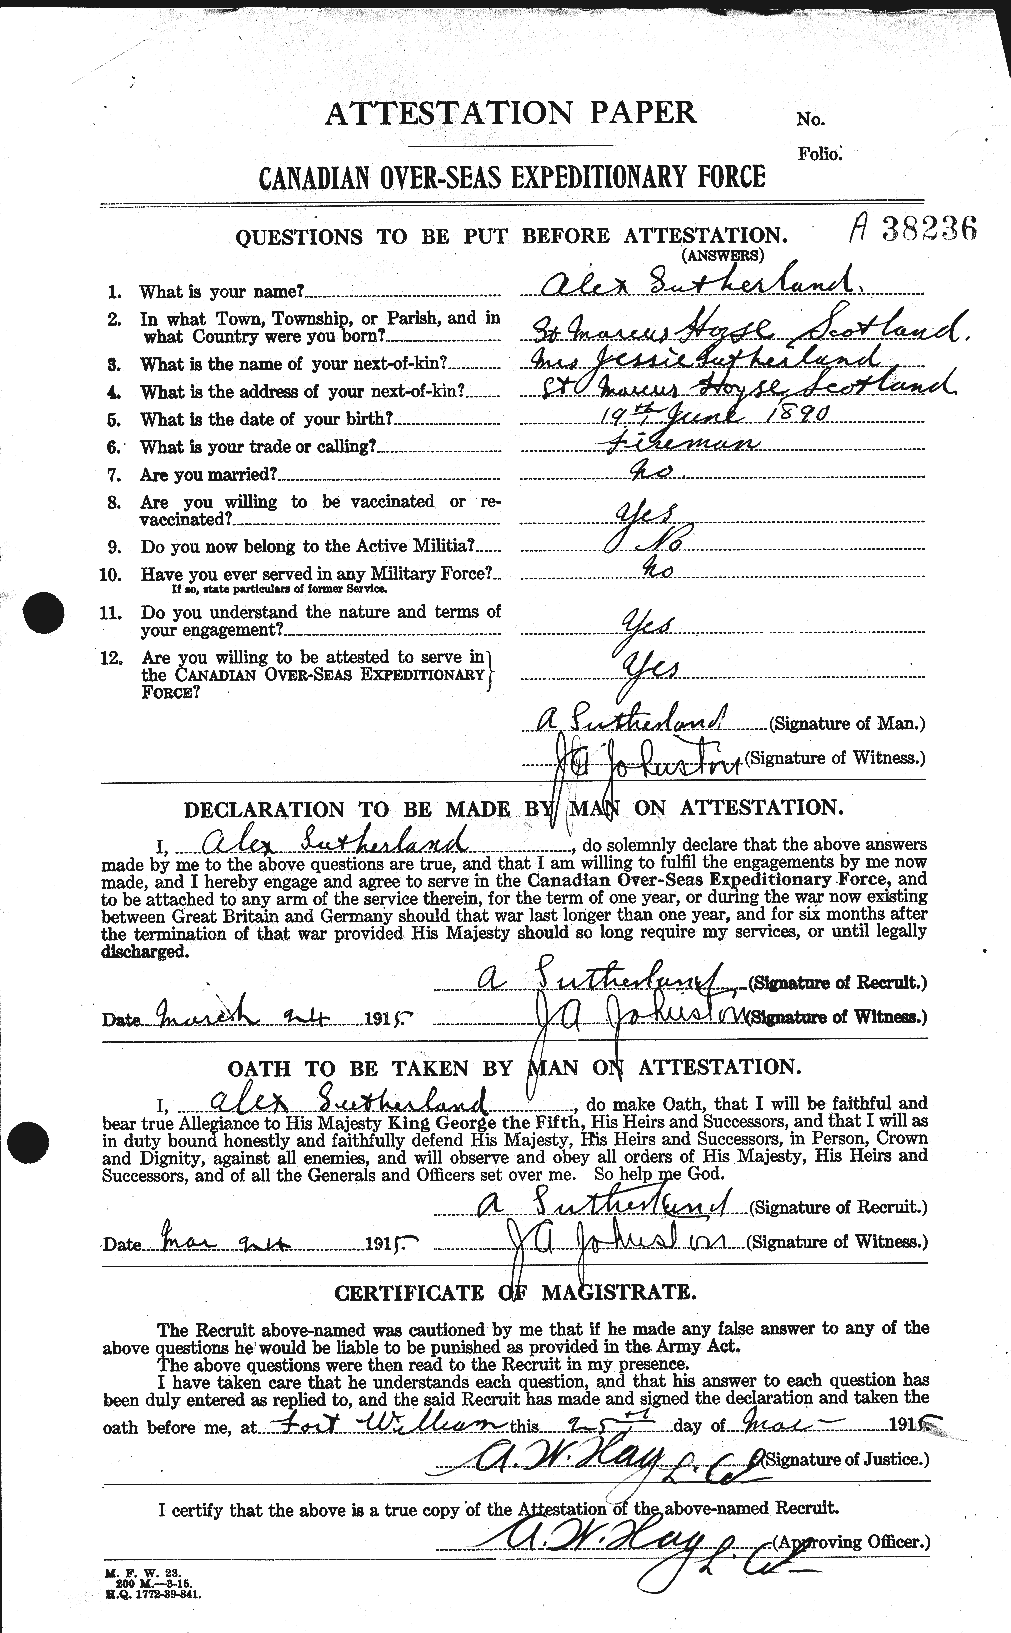 Personnel Records of the First World War - CEF 125376a